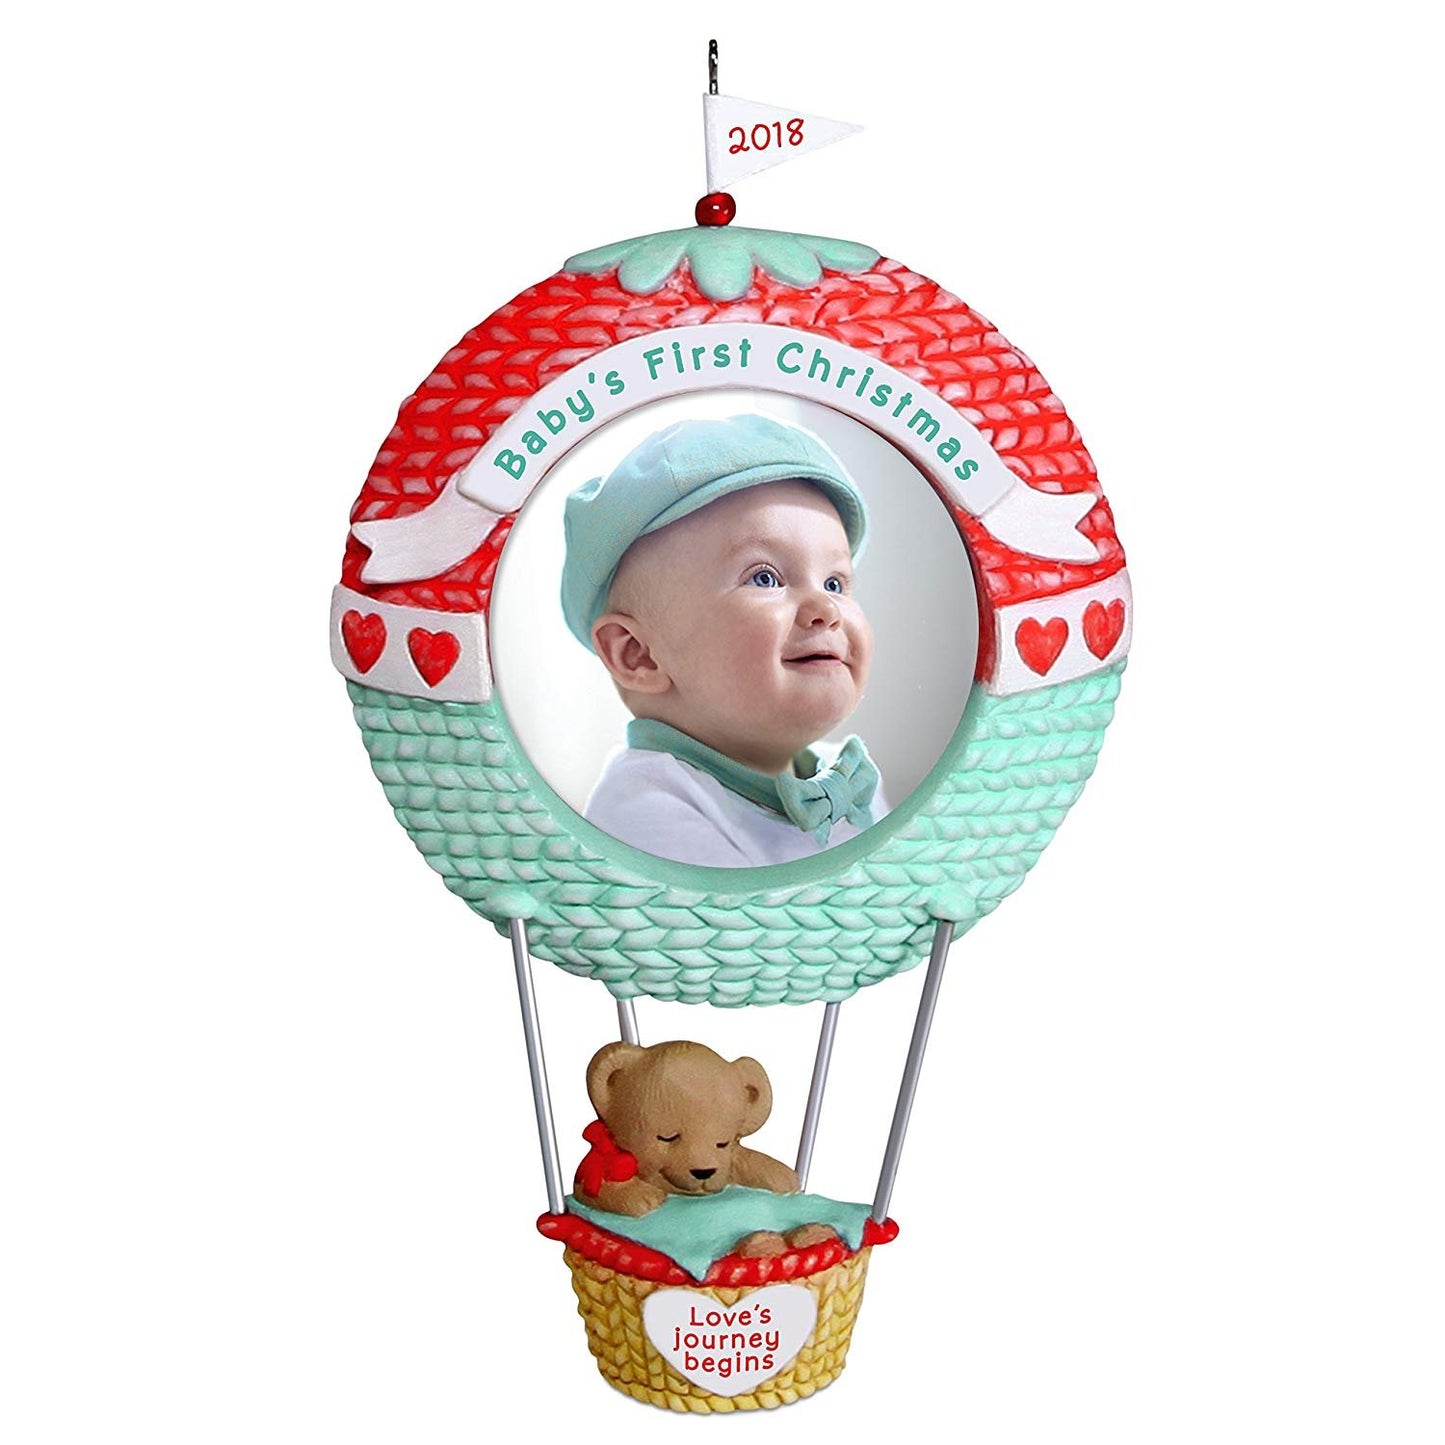 Hallmark Keepsake Ornament 2018 Personalized Year Dated, Baby's First Christmas Love's Journey Begins Picture Frame, Photo, Hot Air Balloon